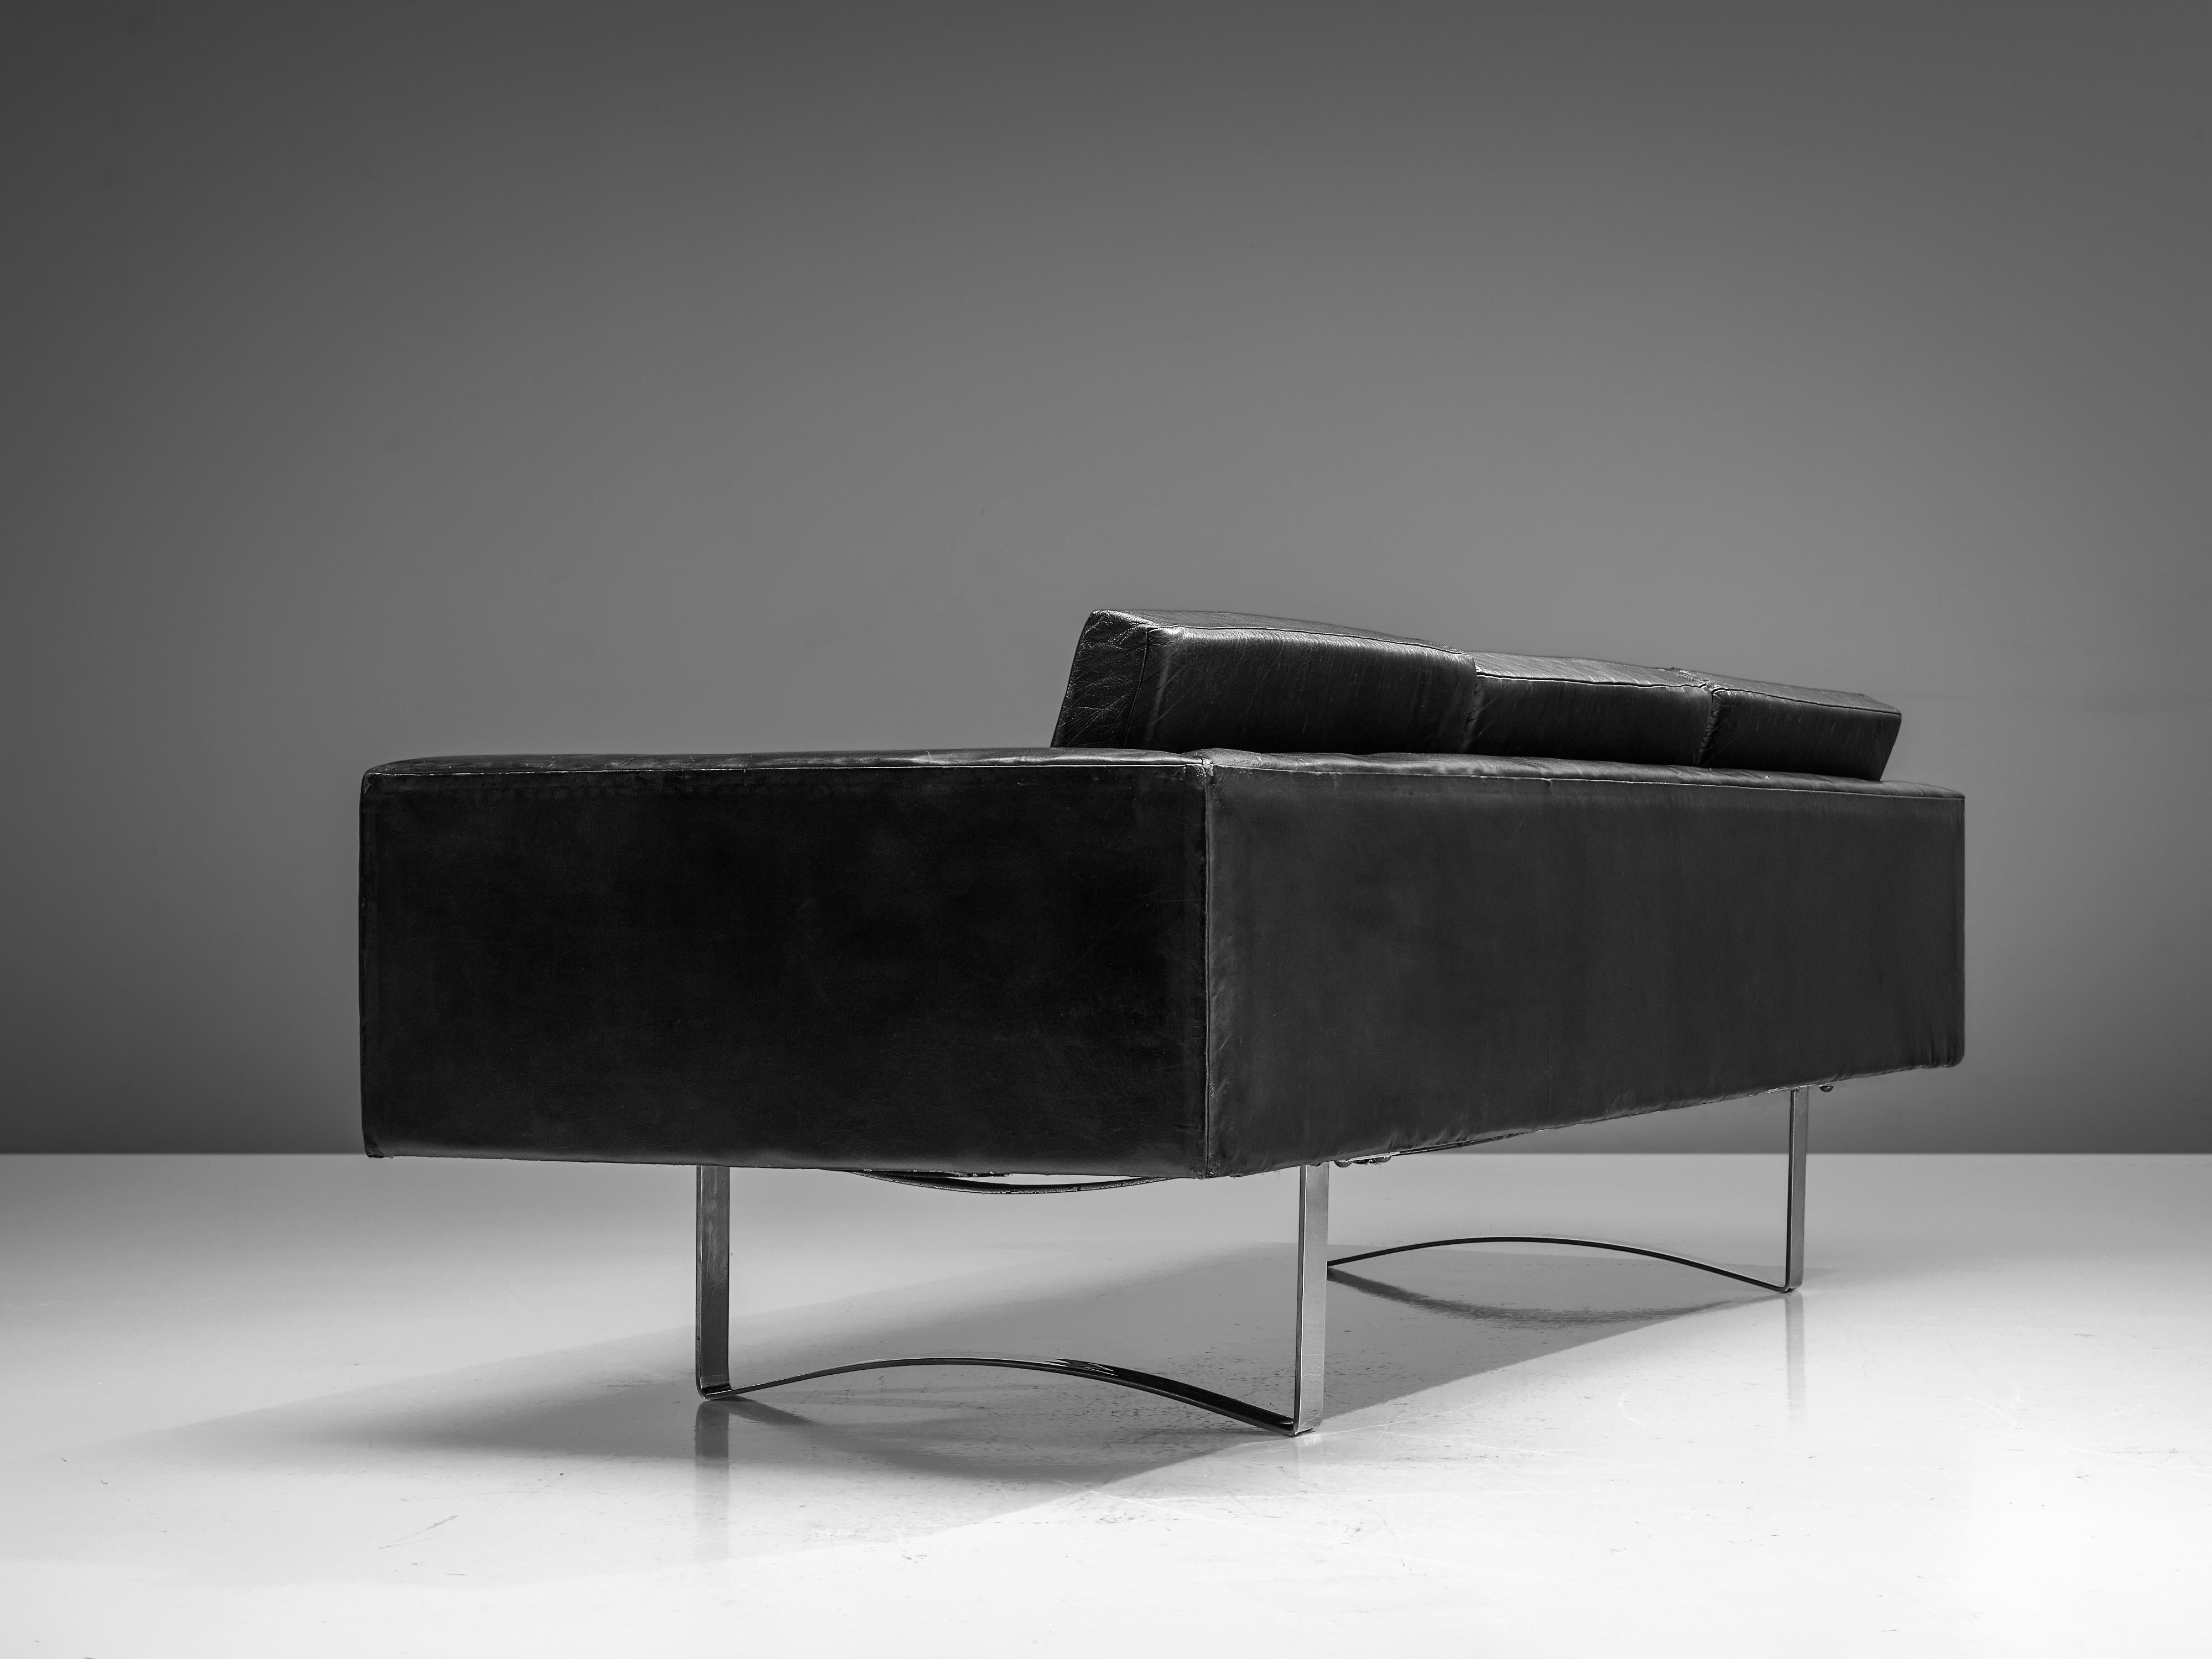 Bodil Kjaer for Hovedstadens Møbelfabrik, sofa model 71, leather, steel, Denmark, 1959.

A signature piece of Bodil Kjaer, designed in 1959. Kjaer conceived this sofa together with a lounge chair for use in public spaces of contemporary